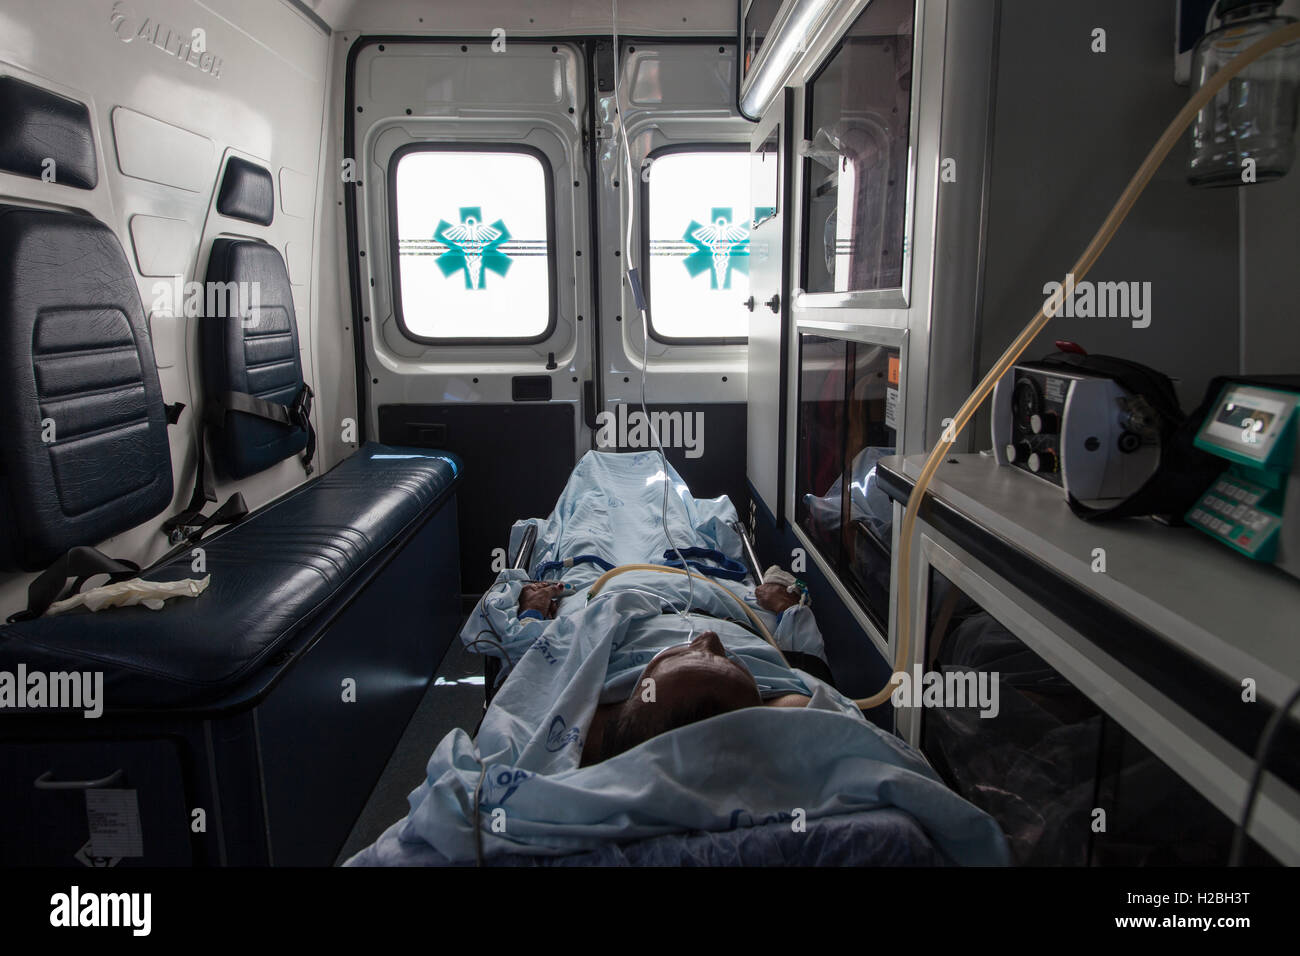 Patient inside an ambulance, a vehicle for transportation of sick or injured people to, from or between places of treatment for an illness or injury, and in some instances will also provide out of hospital medical care to the patient. Stock Photo